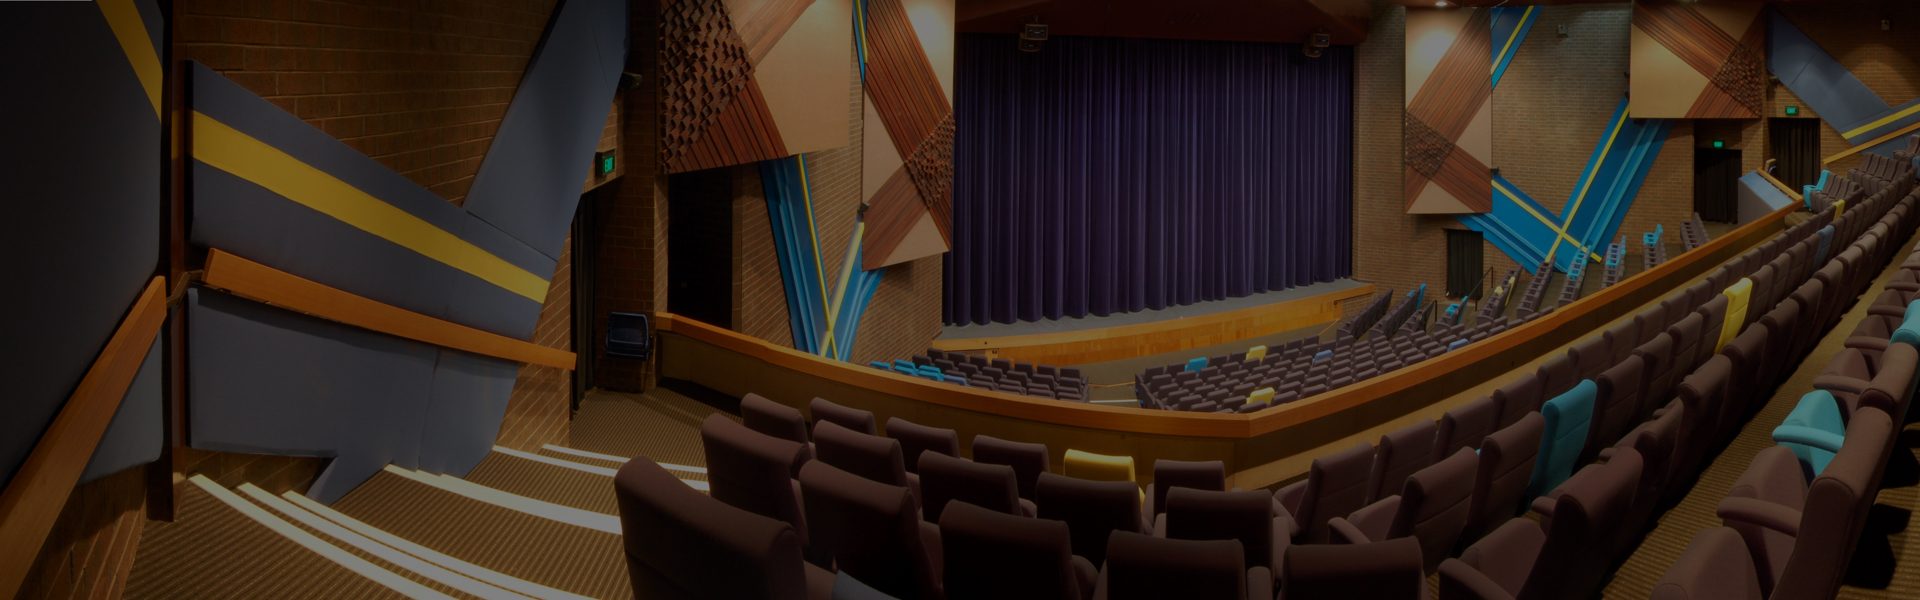 The interior of the Chaffey Theatre, shot from the audience's perspective. The theatre is empty and dark, with brown seats and a deep blue curtain closed across the stage area.